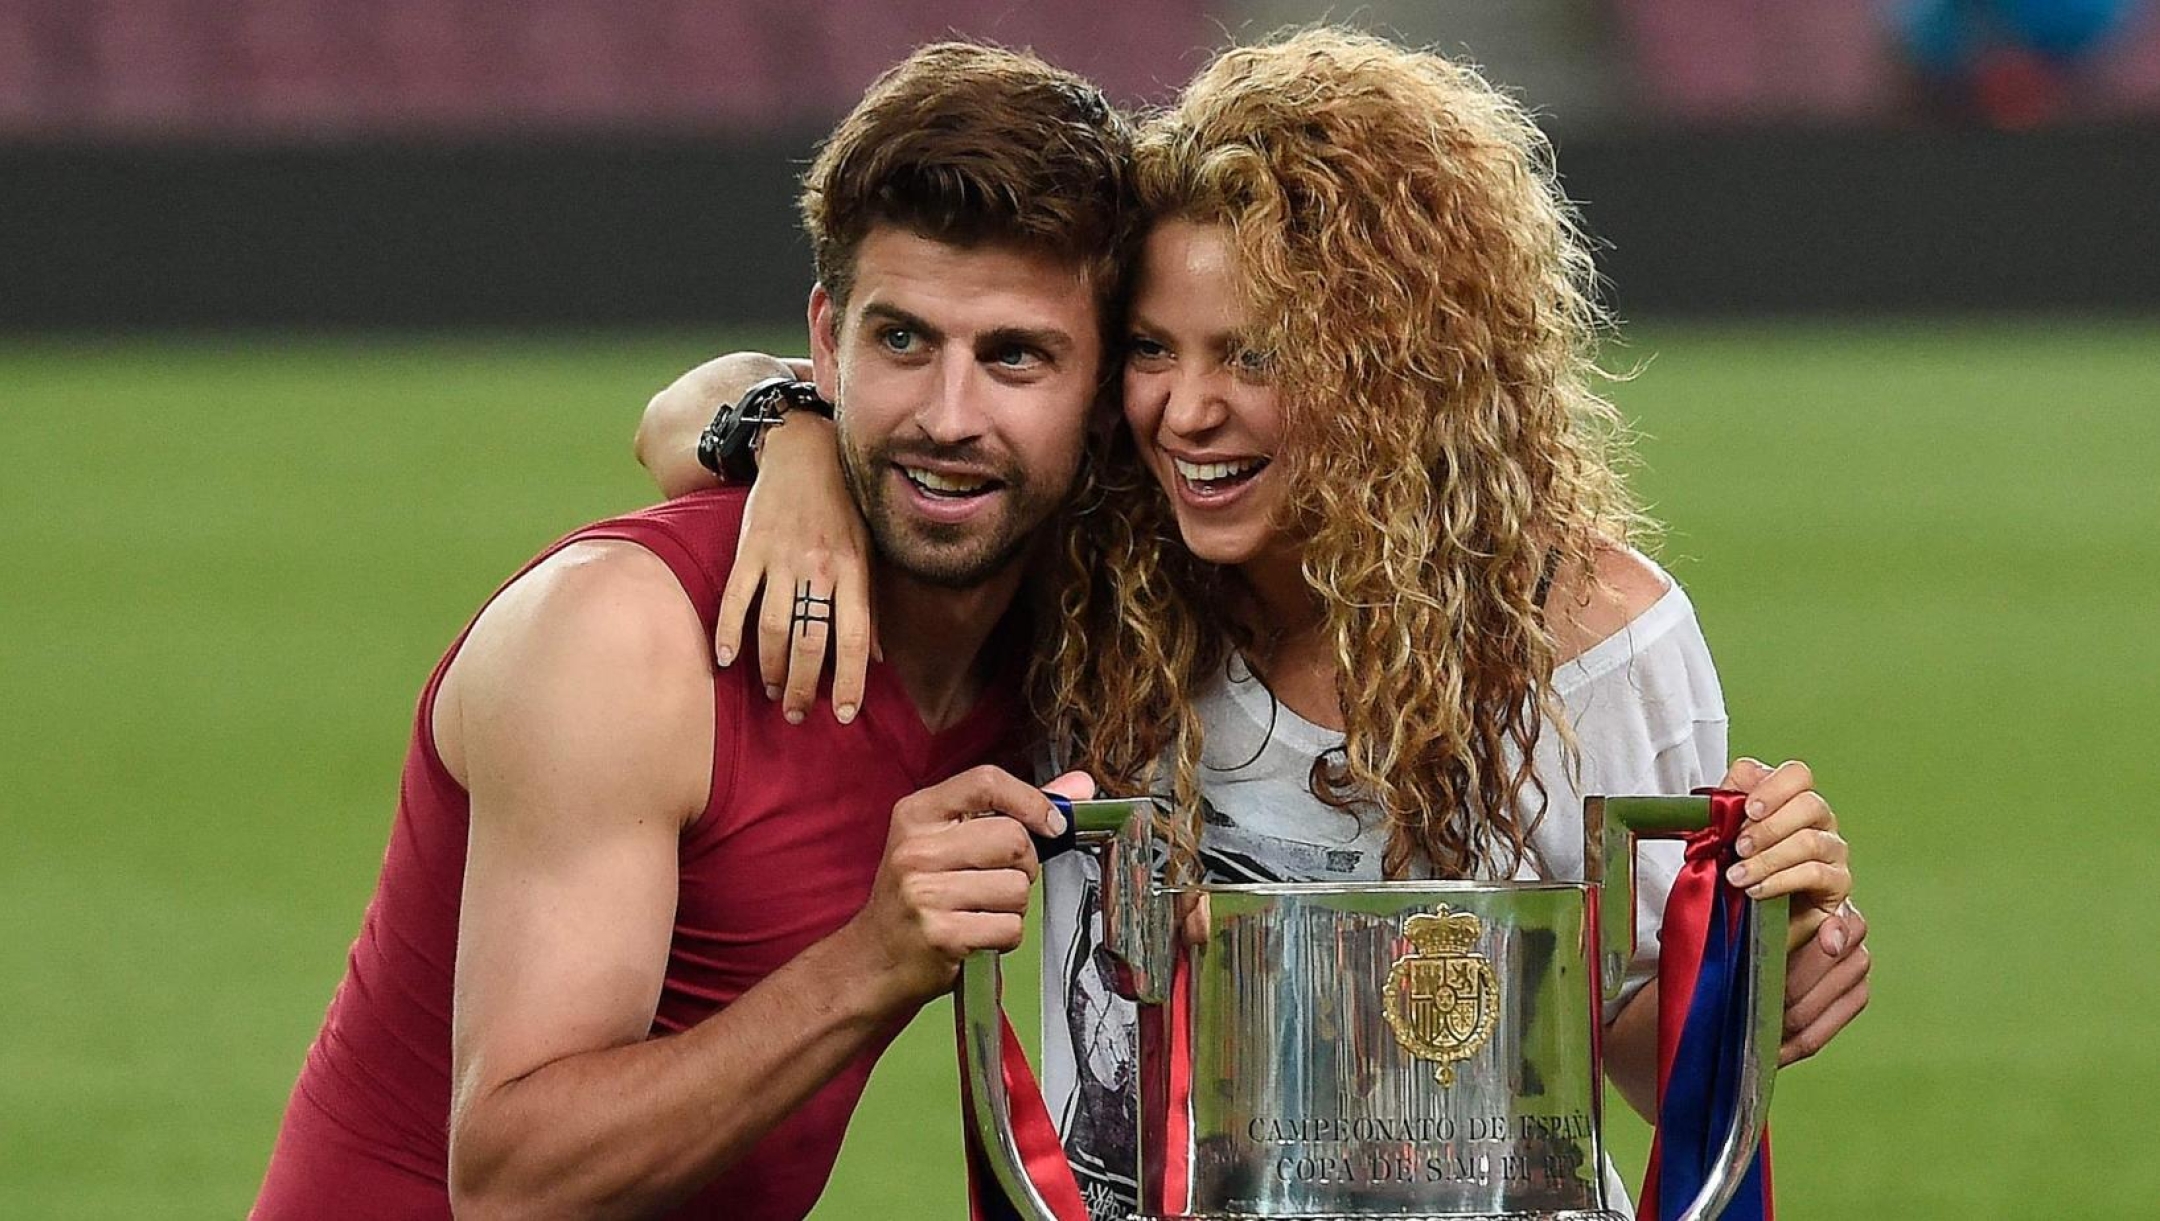 (FILES) In this file photo taken on May 31, 2015 Barcelona's defender Gerard Pique (L) and his wife Colombian singer Shakira pose with the trophy at the end of the Spanish Copa del Rey (King's Cup) final football match Athletic Club Bilbao vs FC Barcelona at the Camp Nou stadium in Barcelona. - FC Barcelona's Gerard Pique has announced his retirement as footballer on Twitter, AFP reports on November 3, 2022. (Photo by Josep LAGO / AFP)